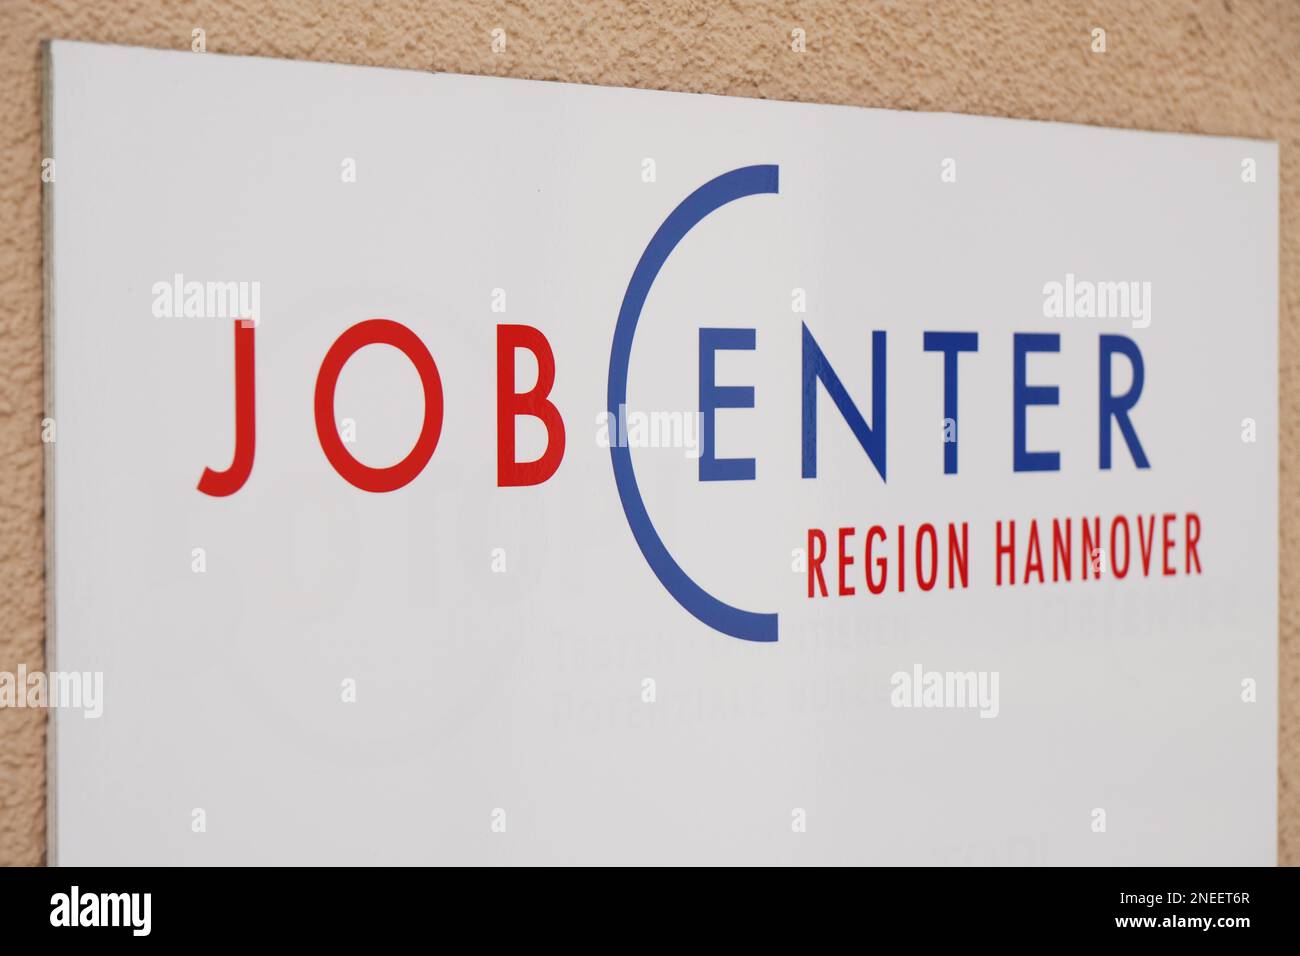 Hannover, Germany - March 17, 2020: Jobcenter or job center logo sign at region office of german unemployment or employment agency Stock Photo